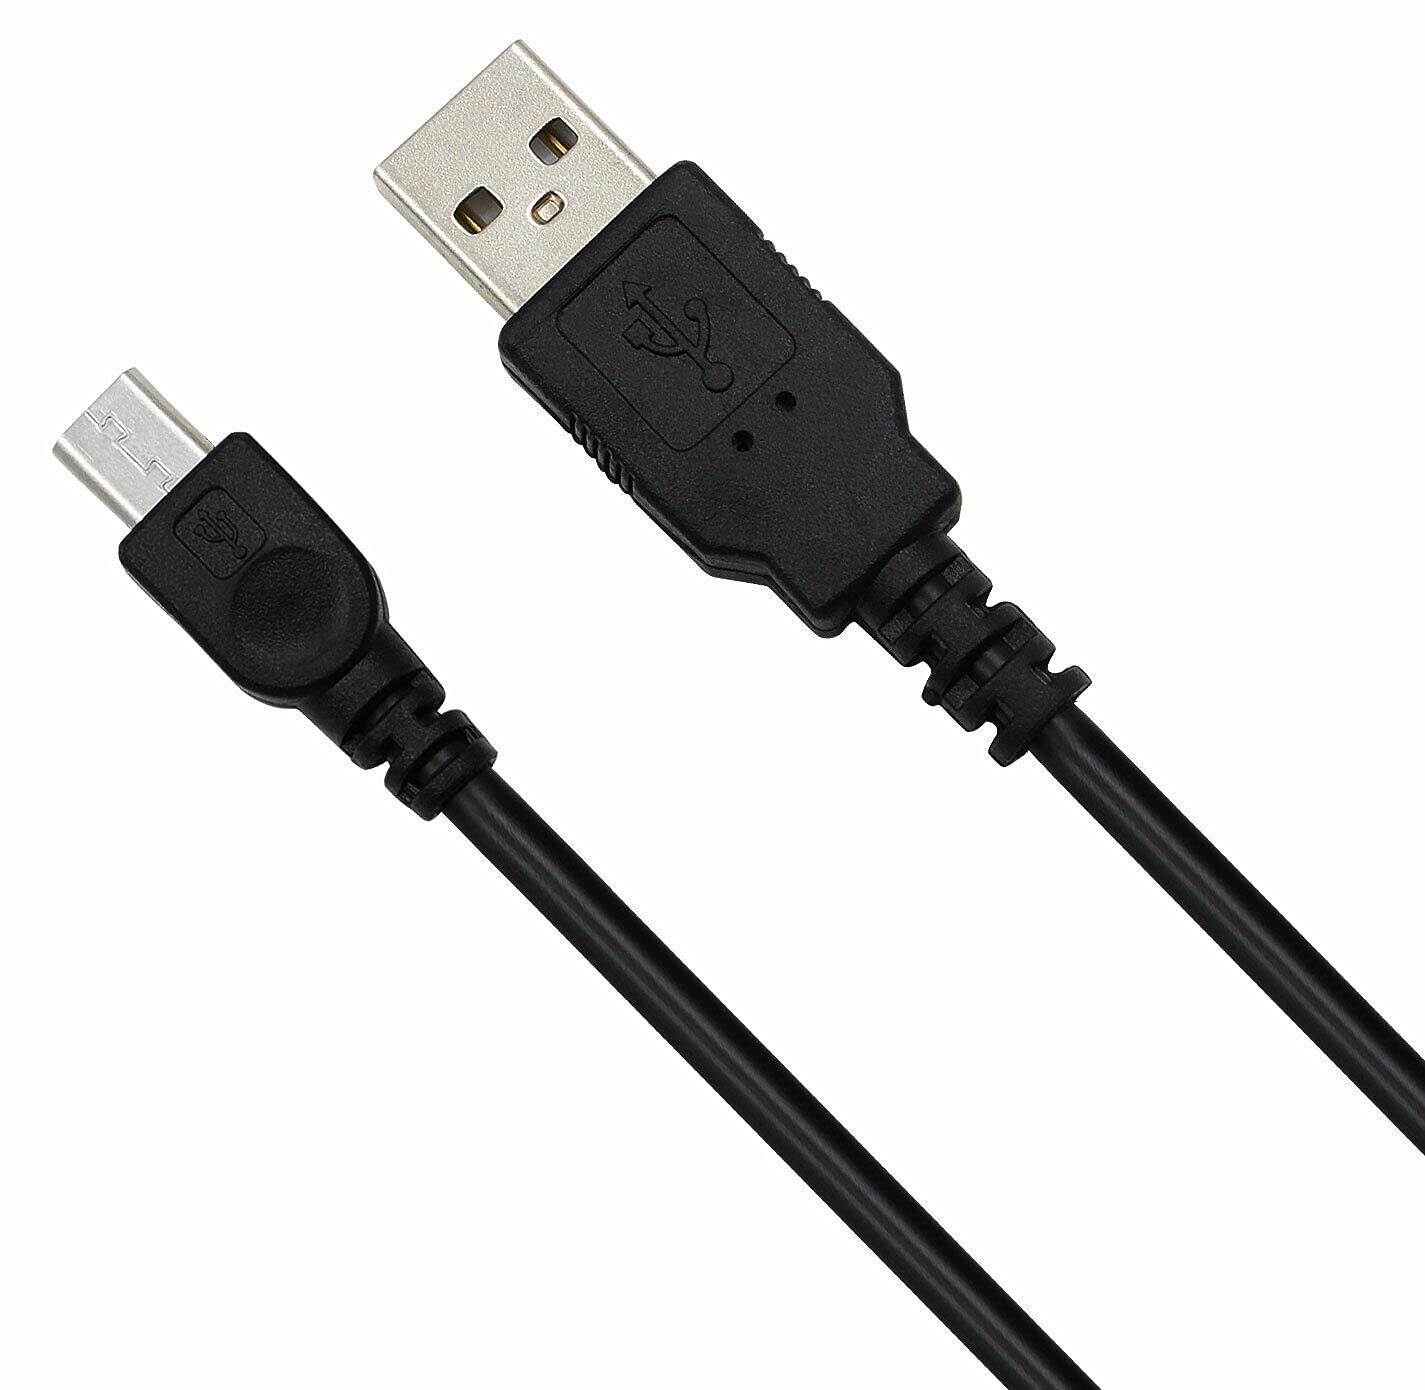 USB cable connected to a computer